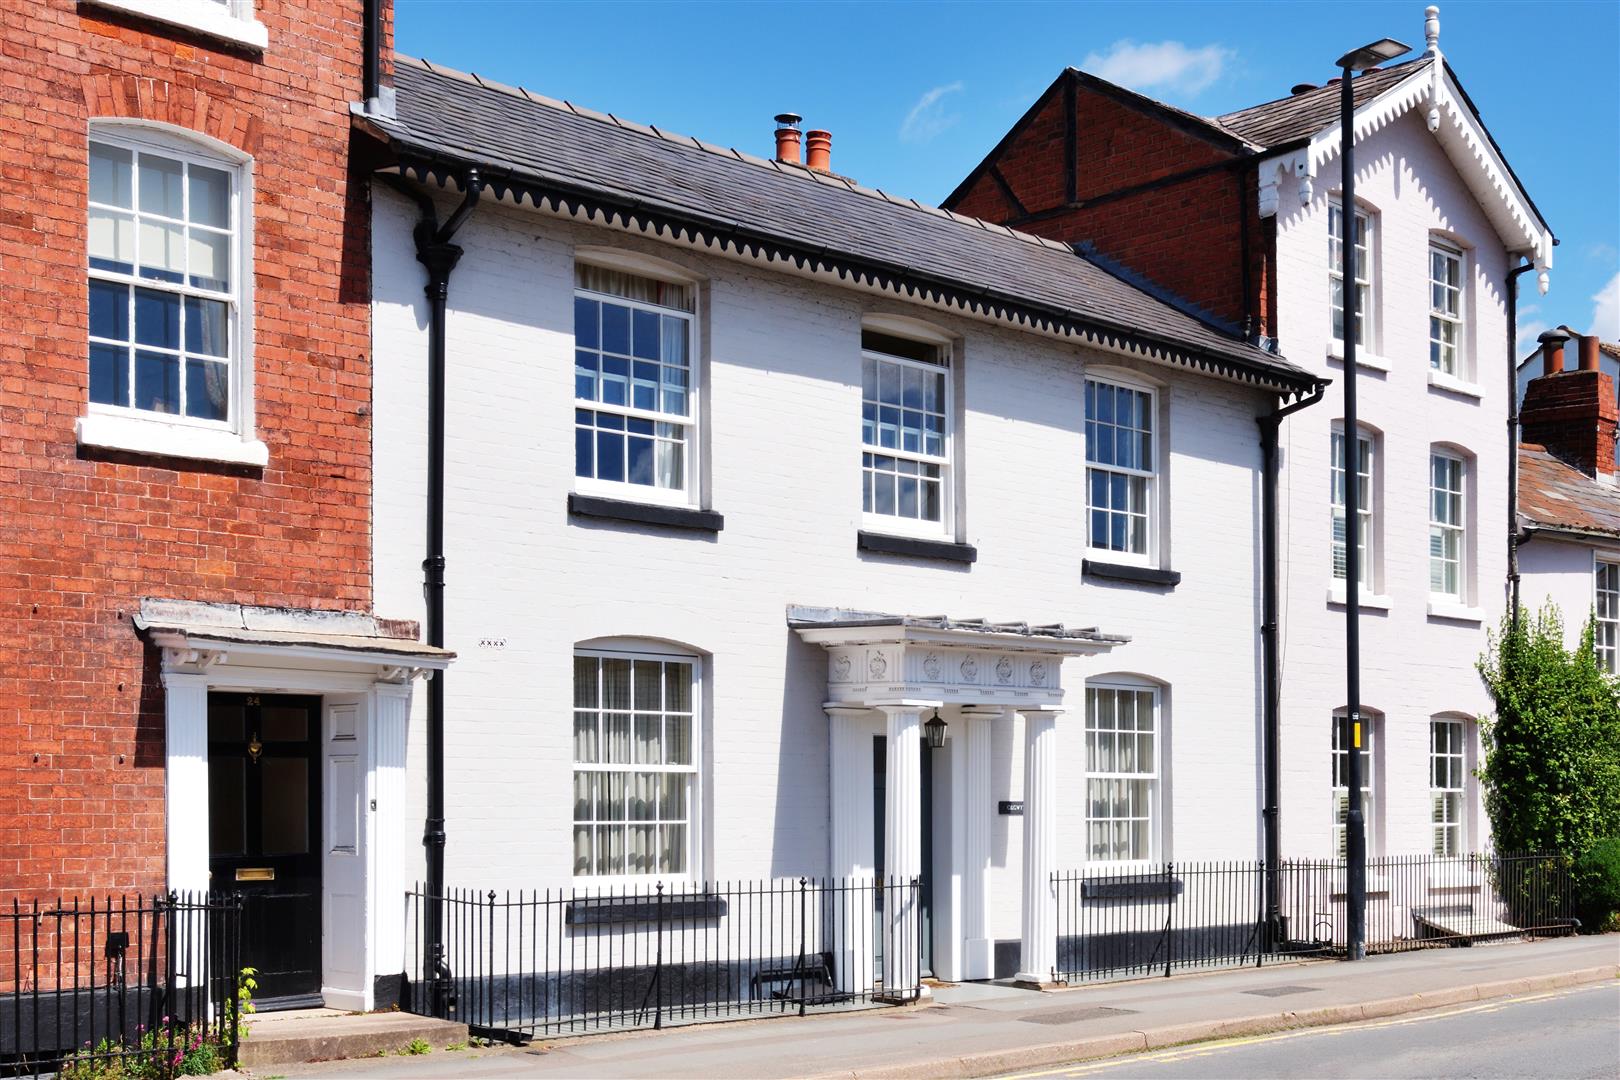 22 Barton Road, Hereford walking distance of the city centre